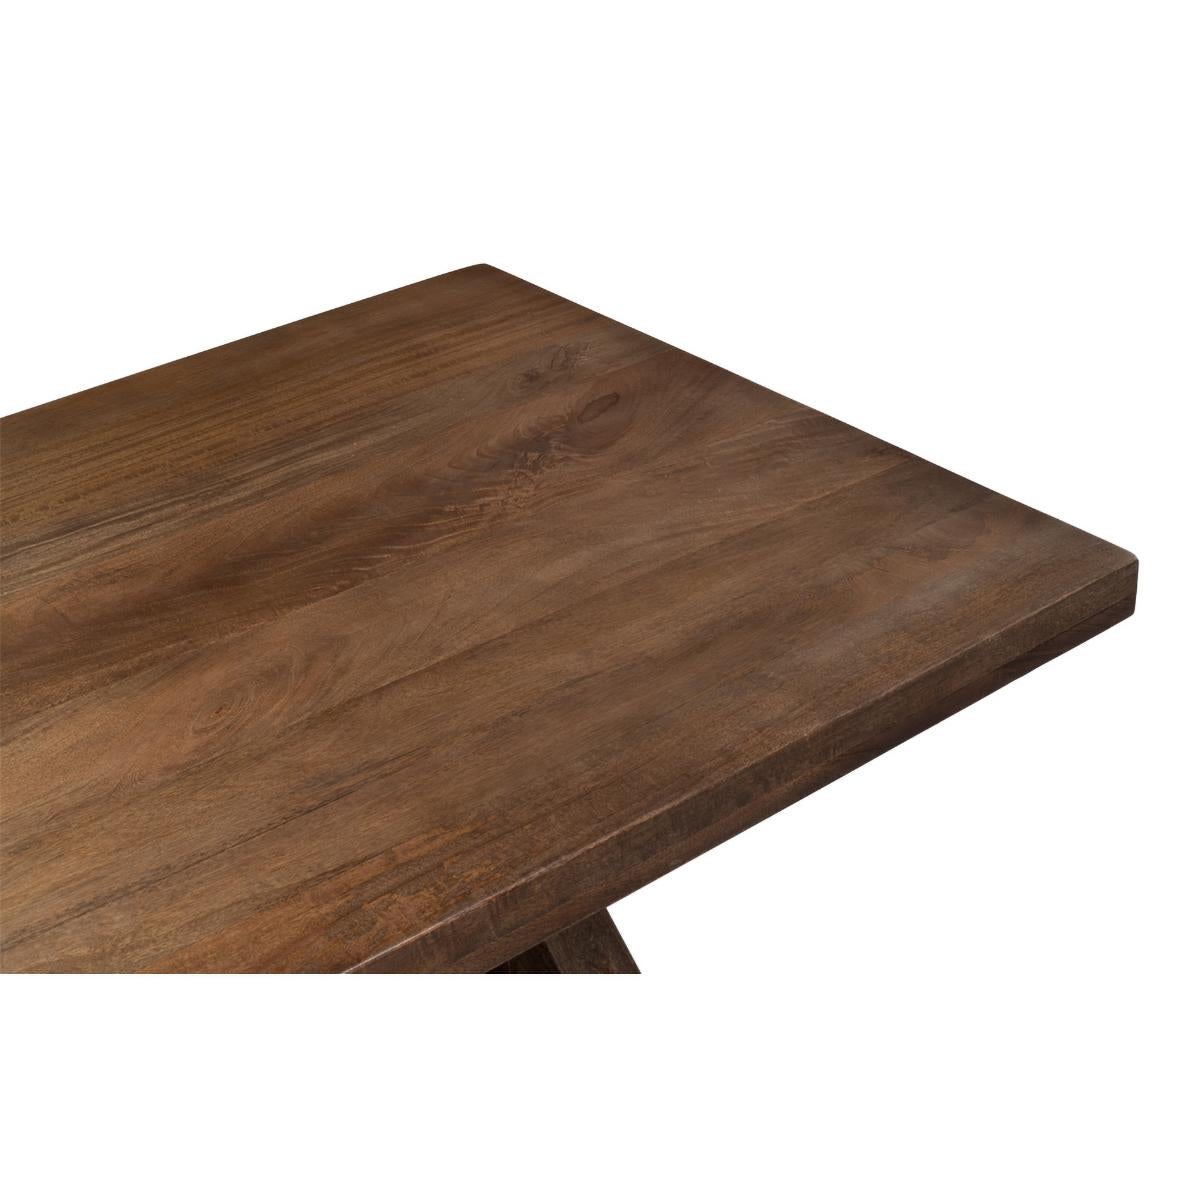 Rustic Farmhouse Refectory Dining Table For Sale